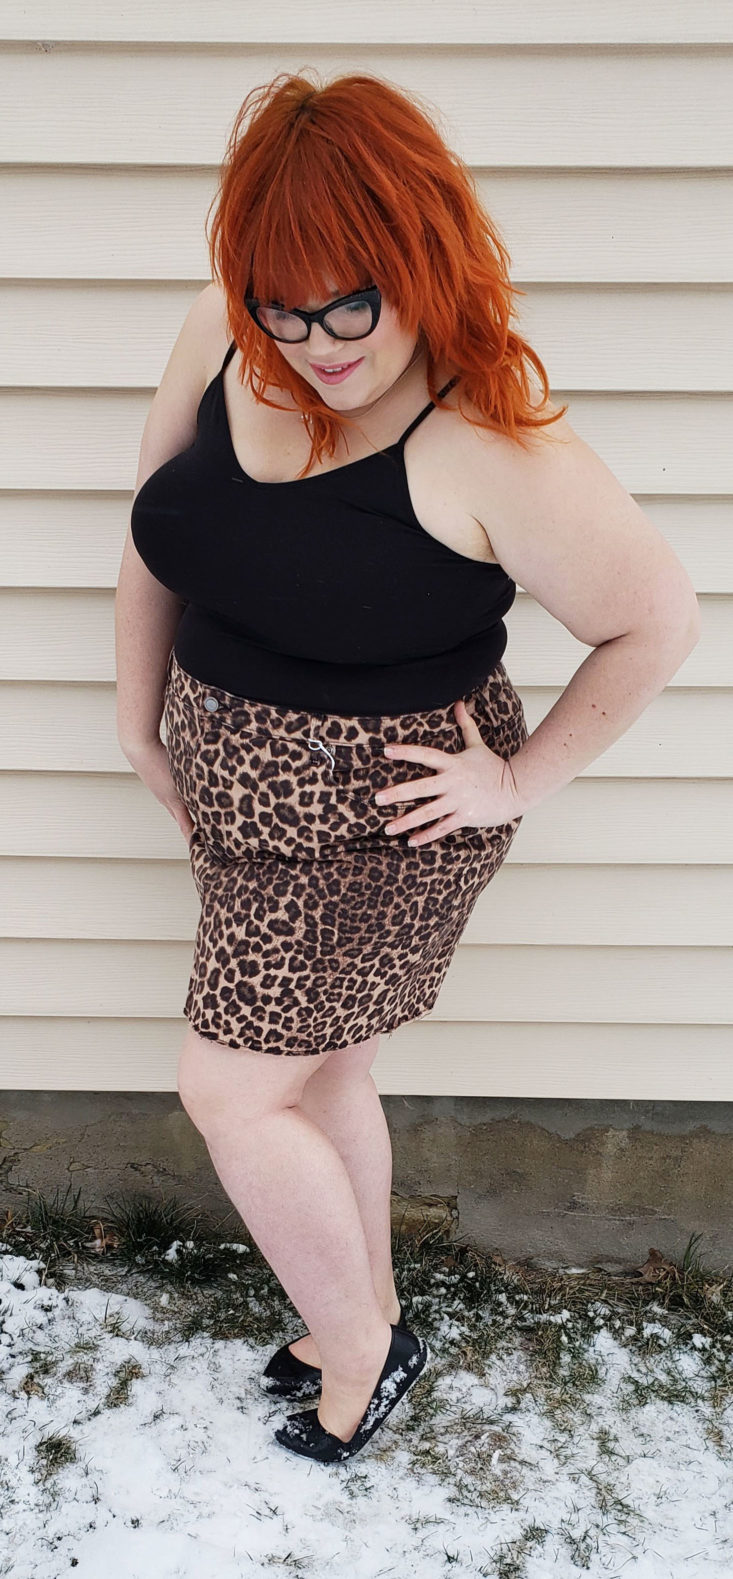 Trunk Club Plus Size Subscription Box Review March 2019 - Cheetah Print Raw Edge Miniskirt by GOOD AMERICAN 2 Side